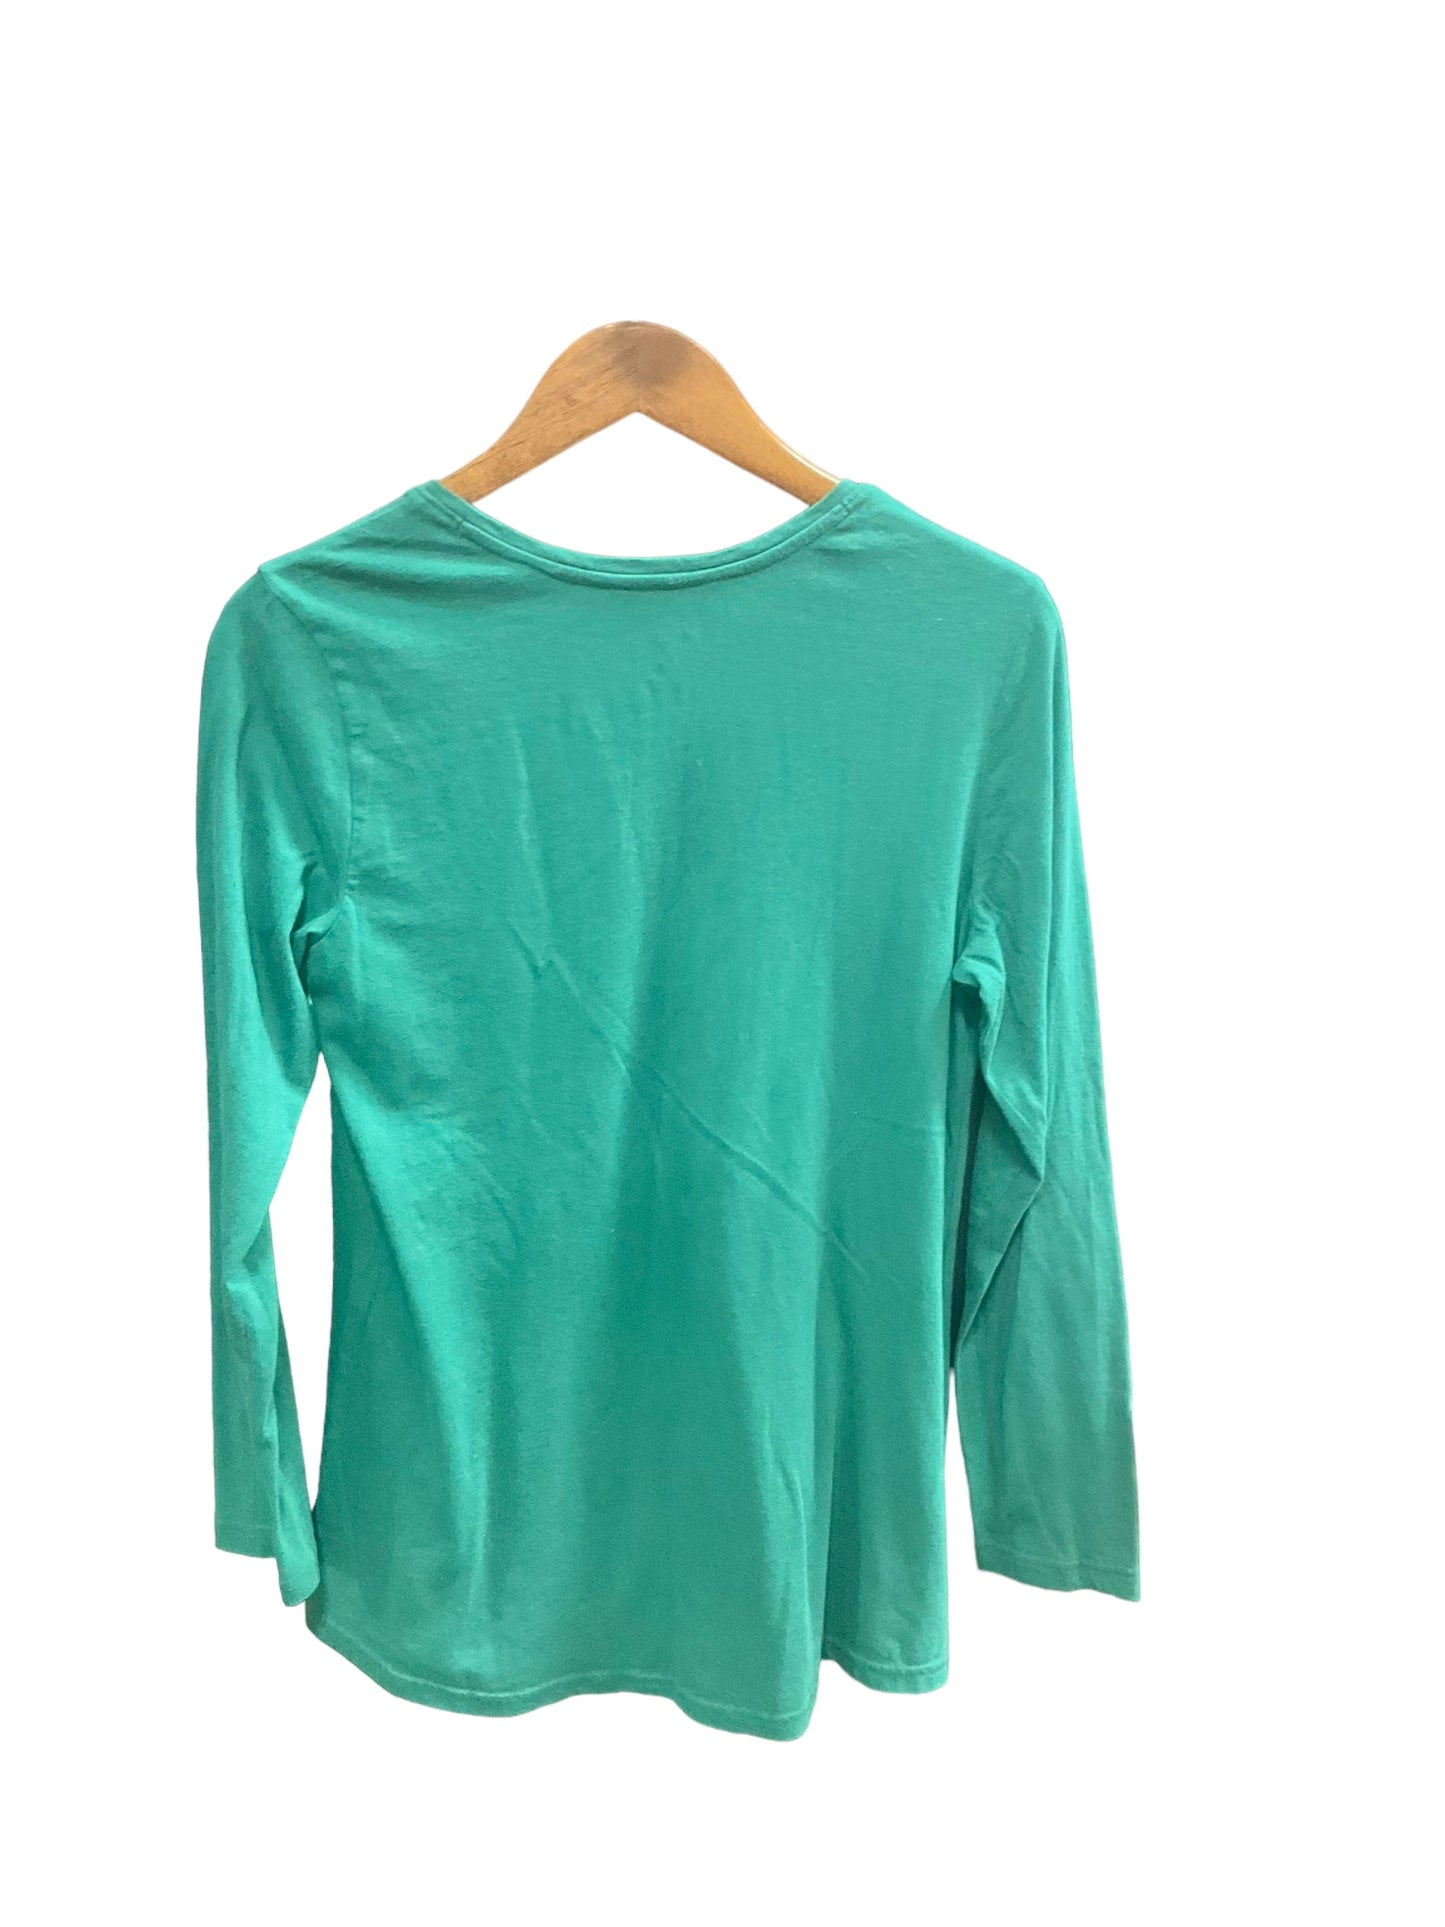 Top Long Sleeve Basic By Natural Reflections  Size: M